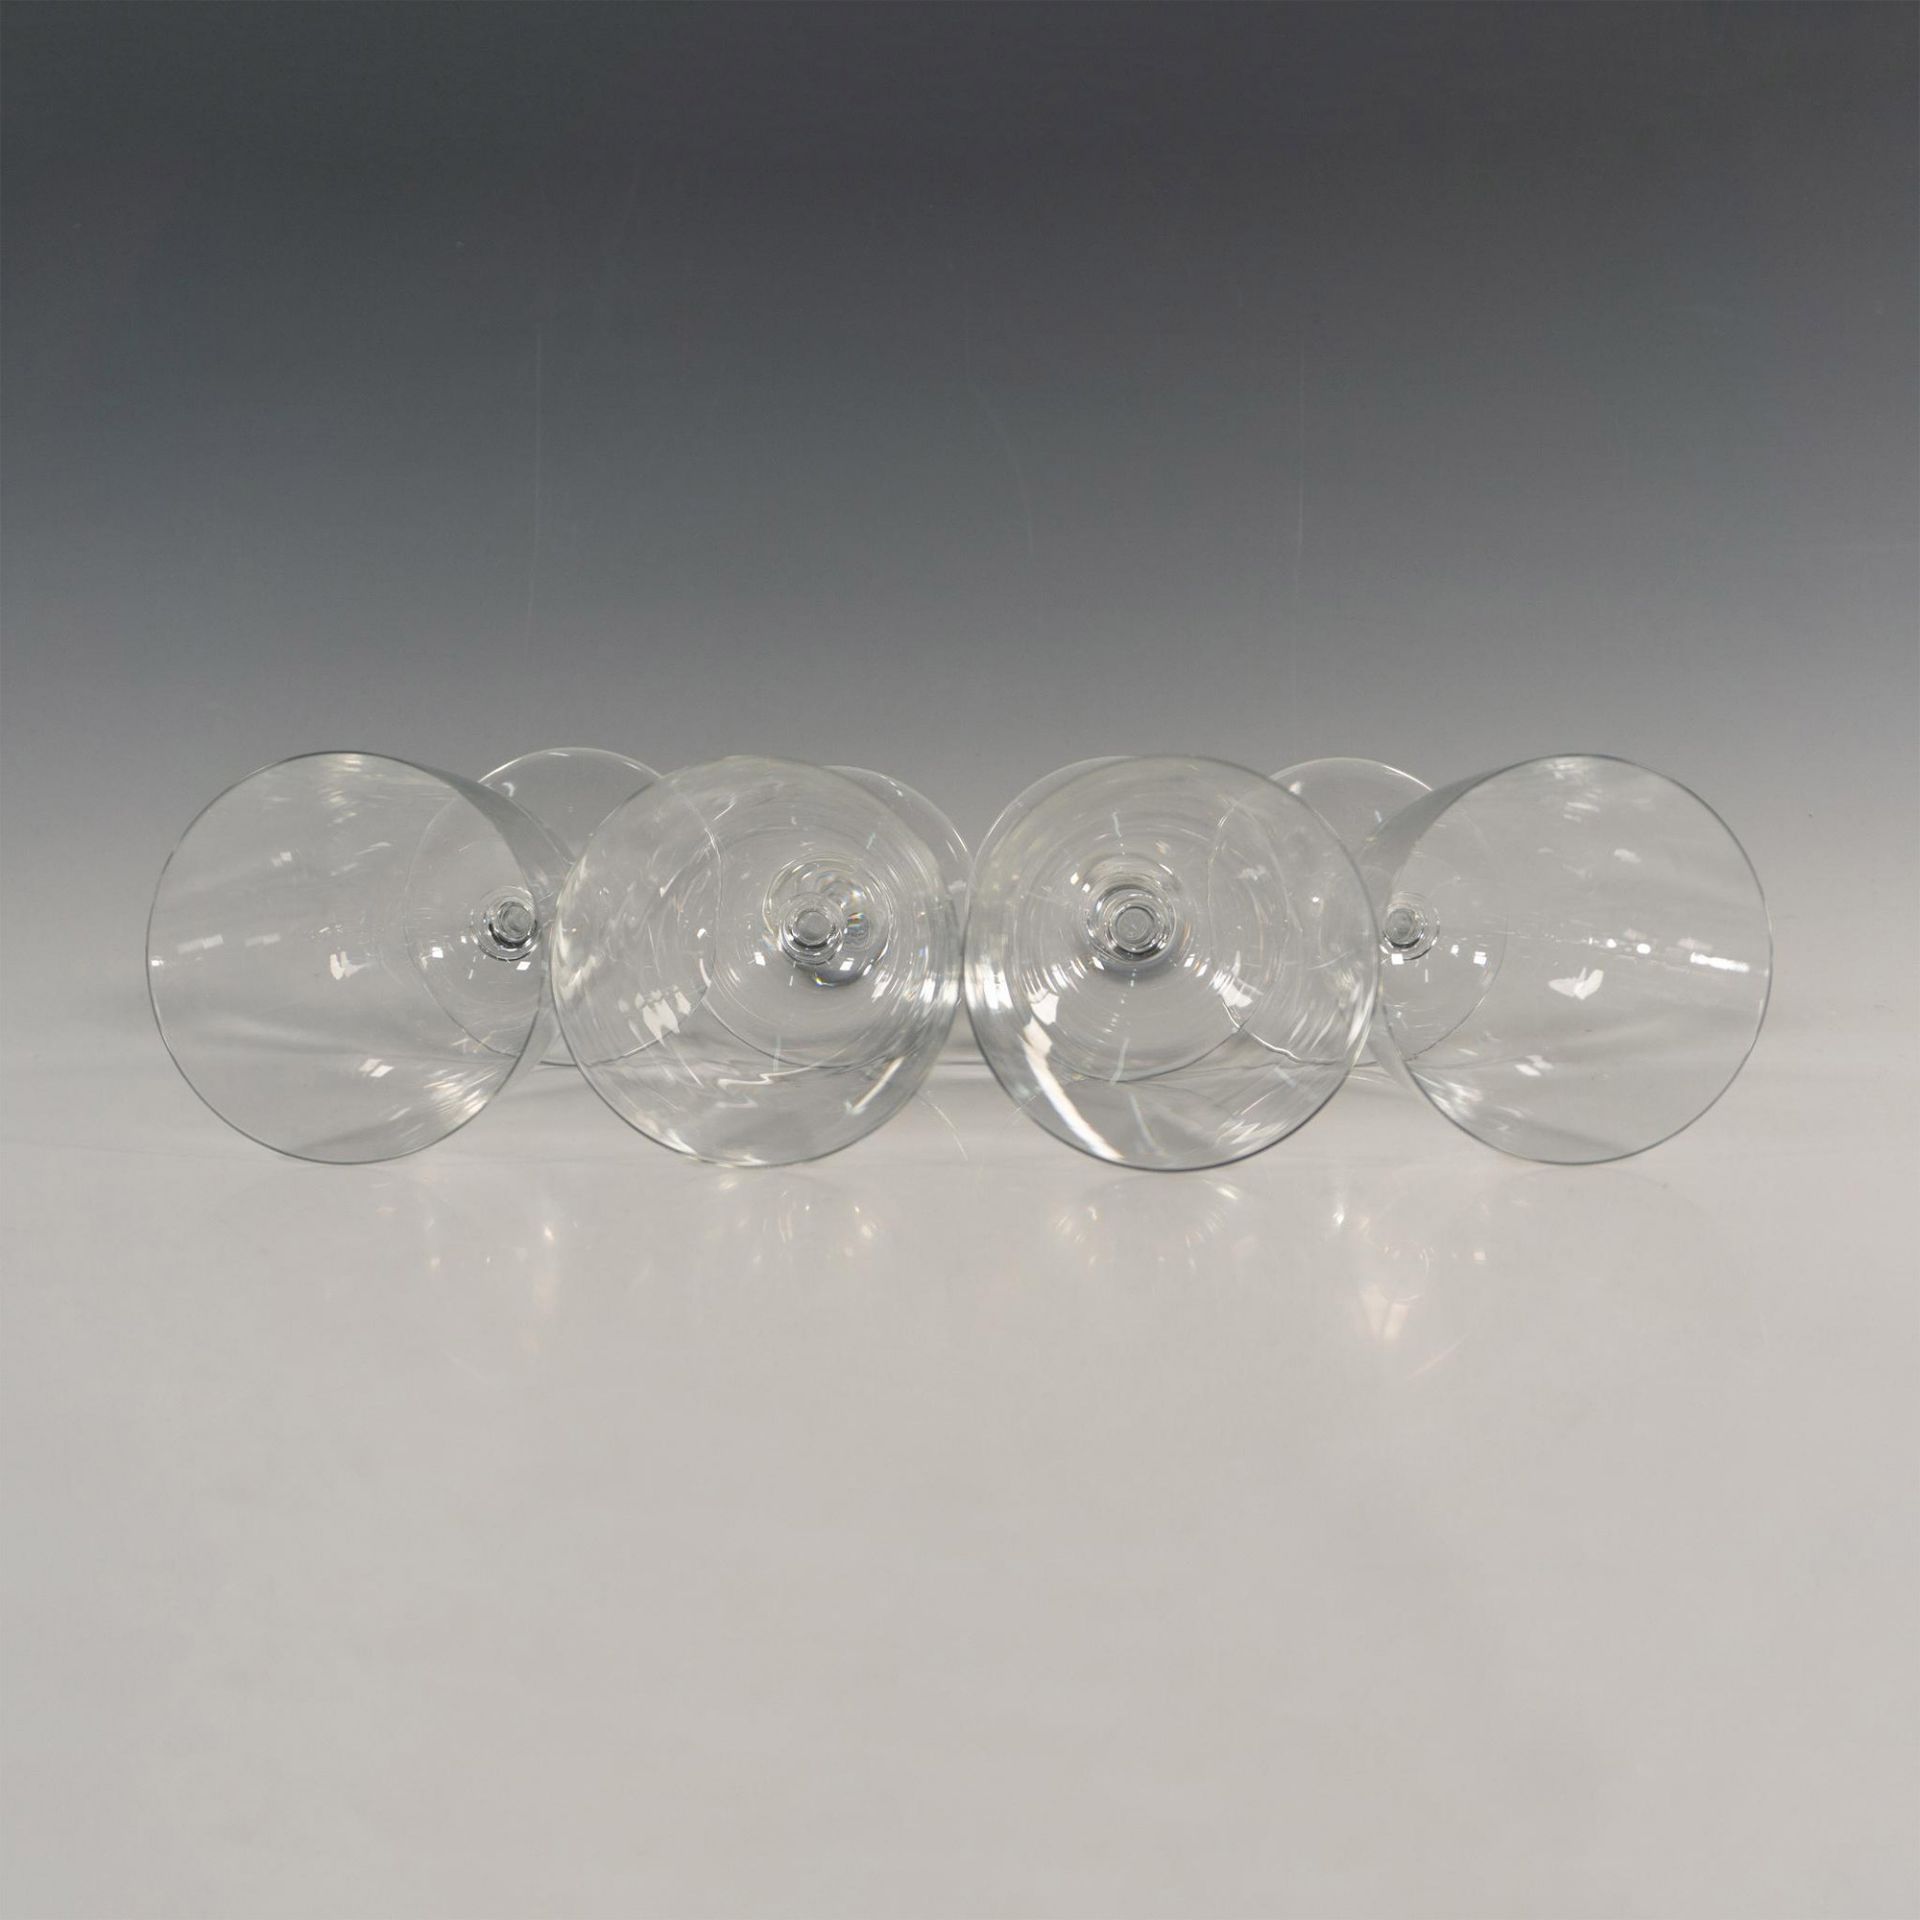 4pc Baccarat Crystal Water Goblet Glasses - Image 2 of 3